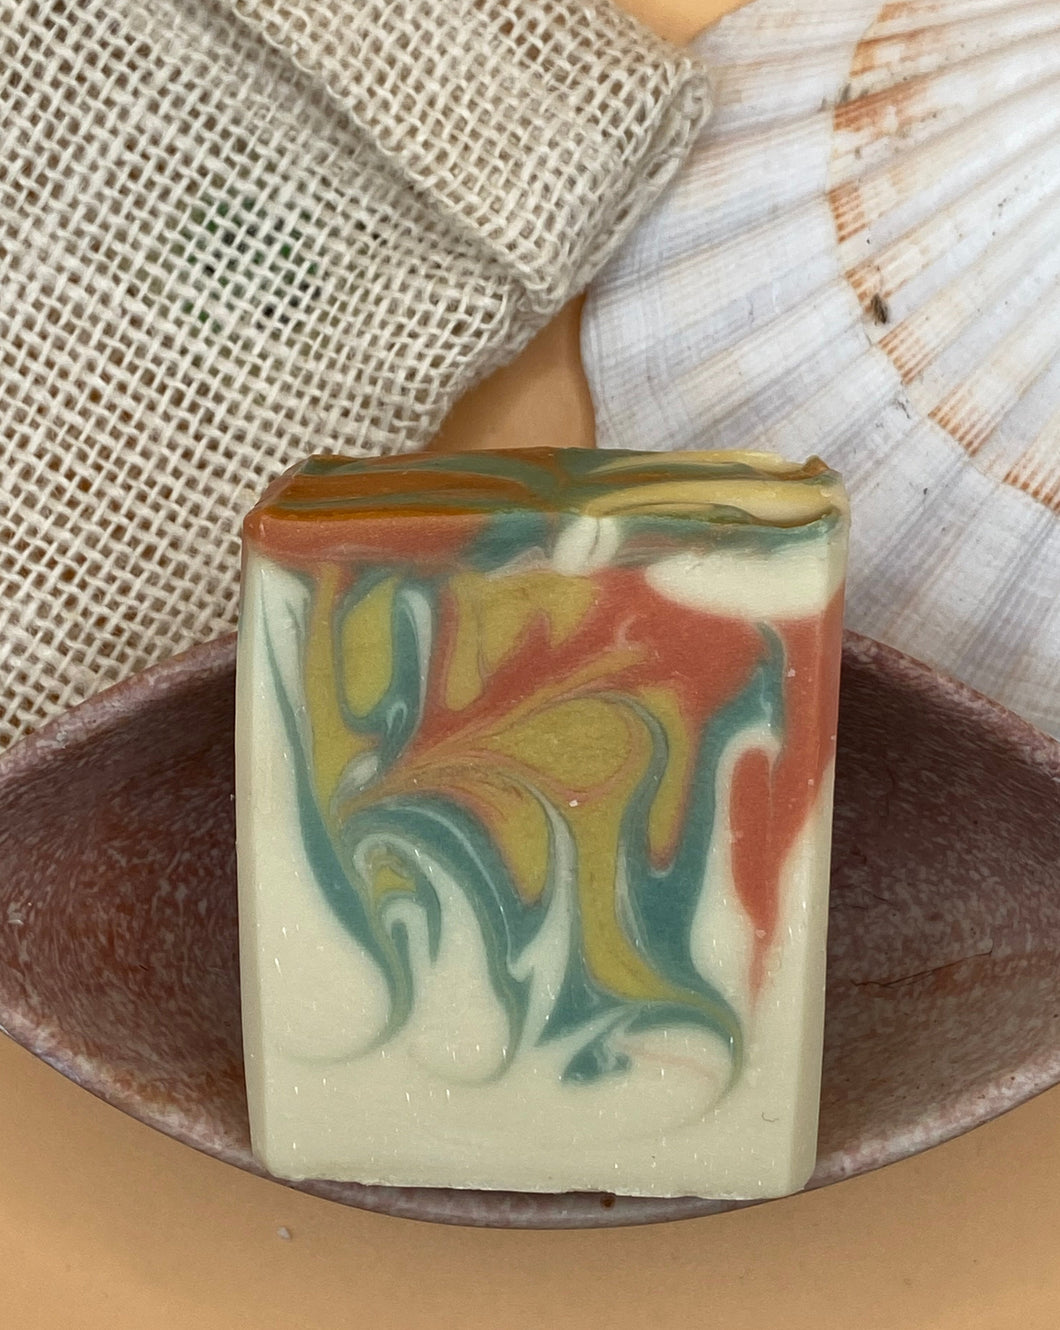 Fig-Vanille Soap showing beautiful colour pattern and design.